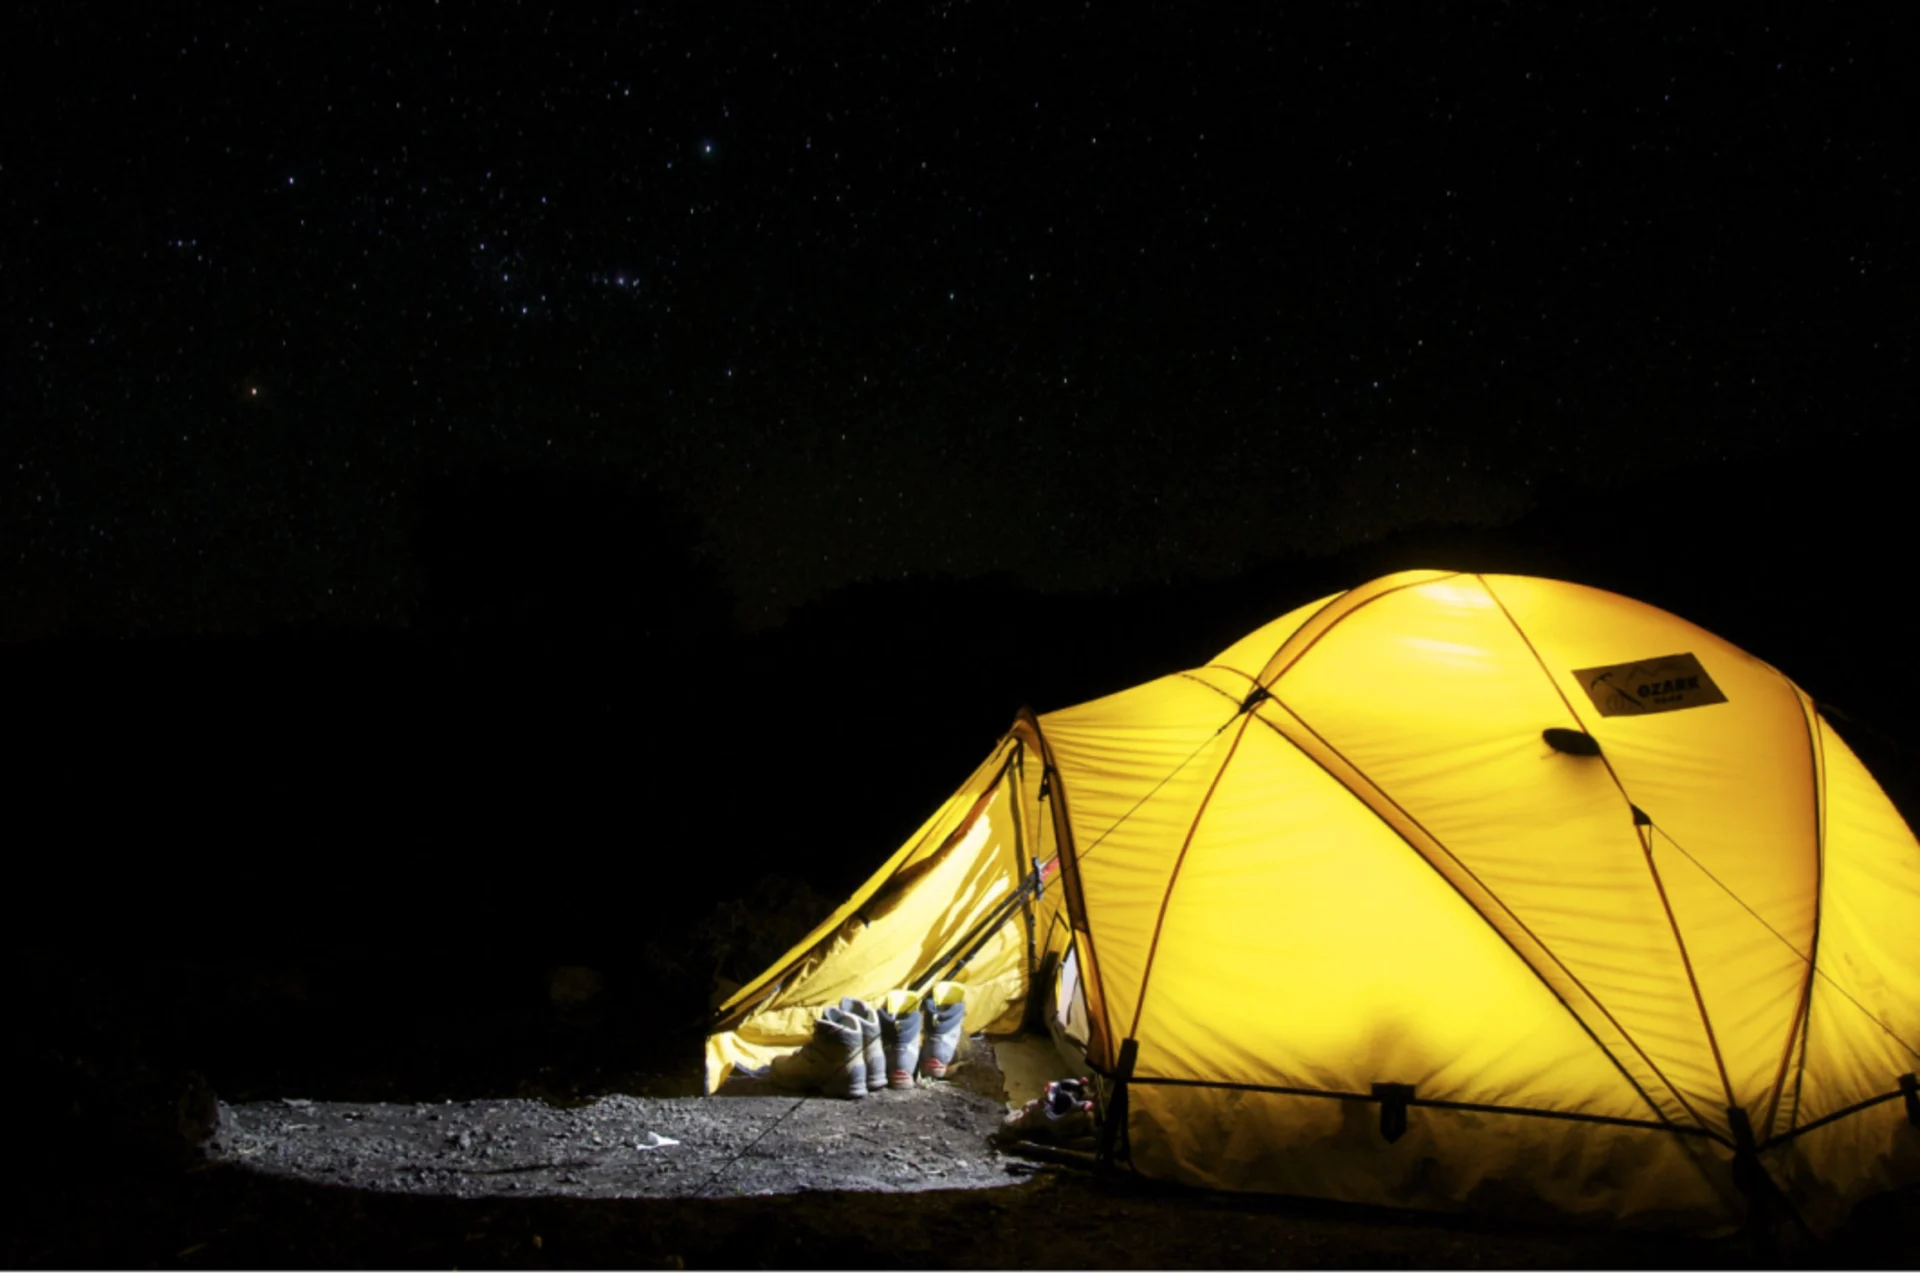 Miss camping? Here's how to bring camping to you